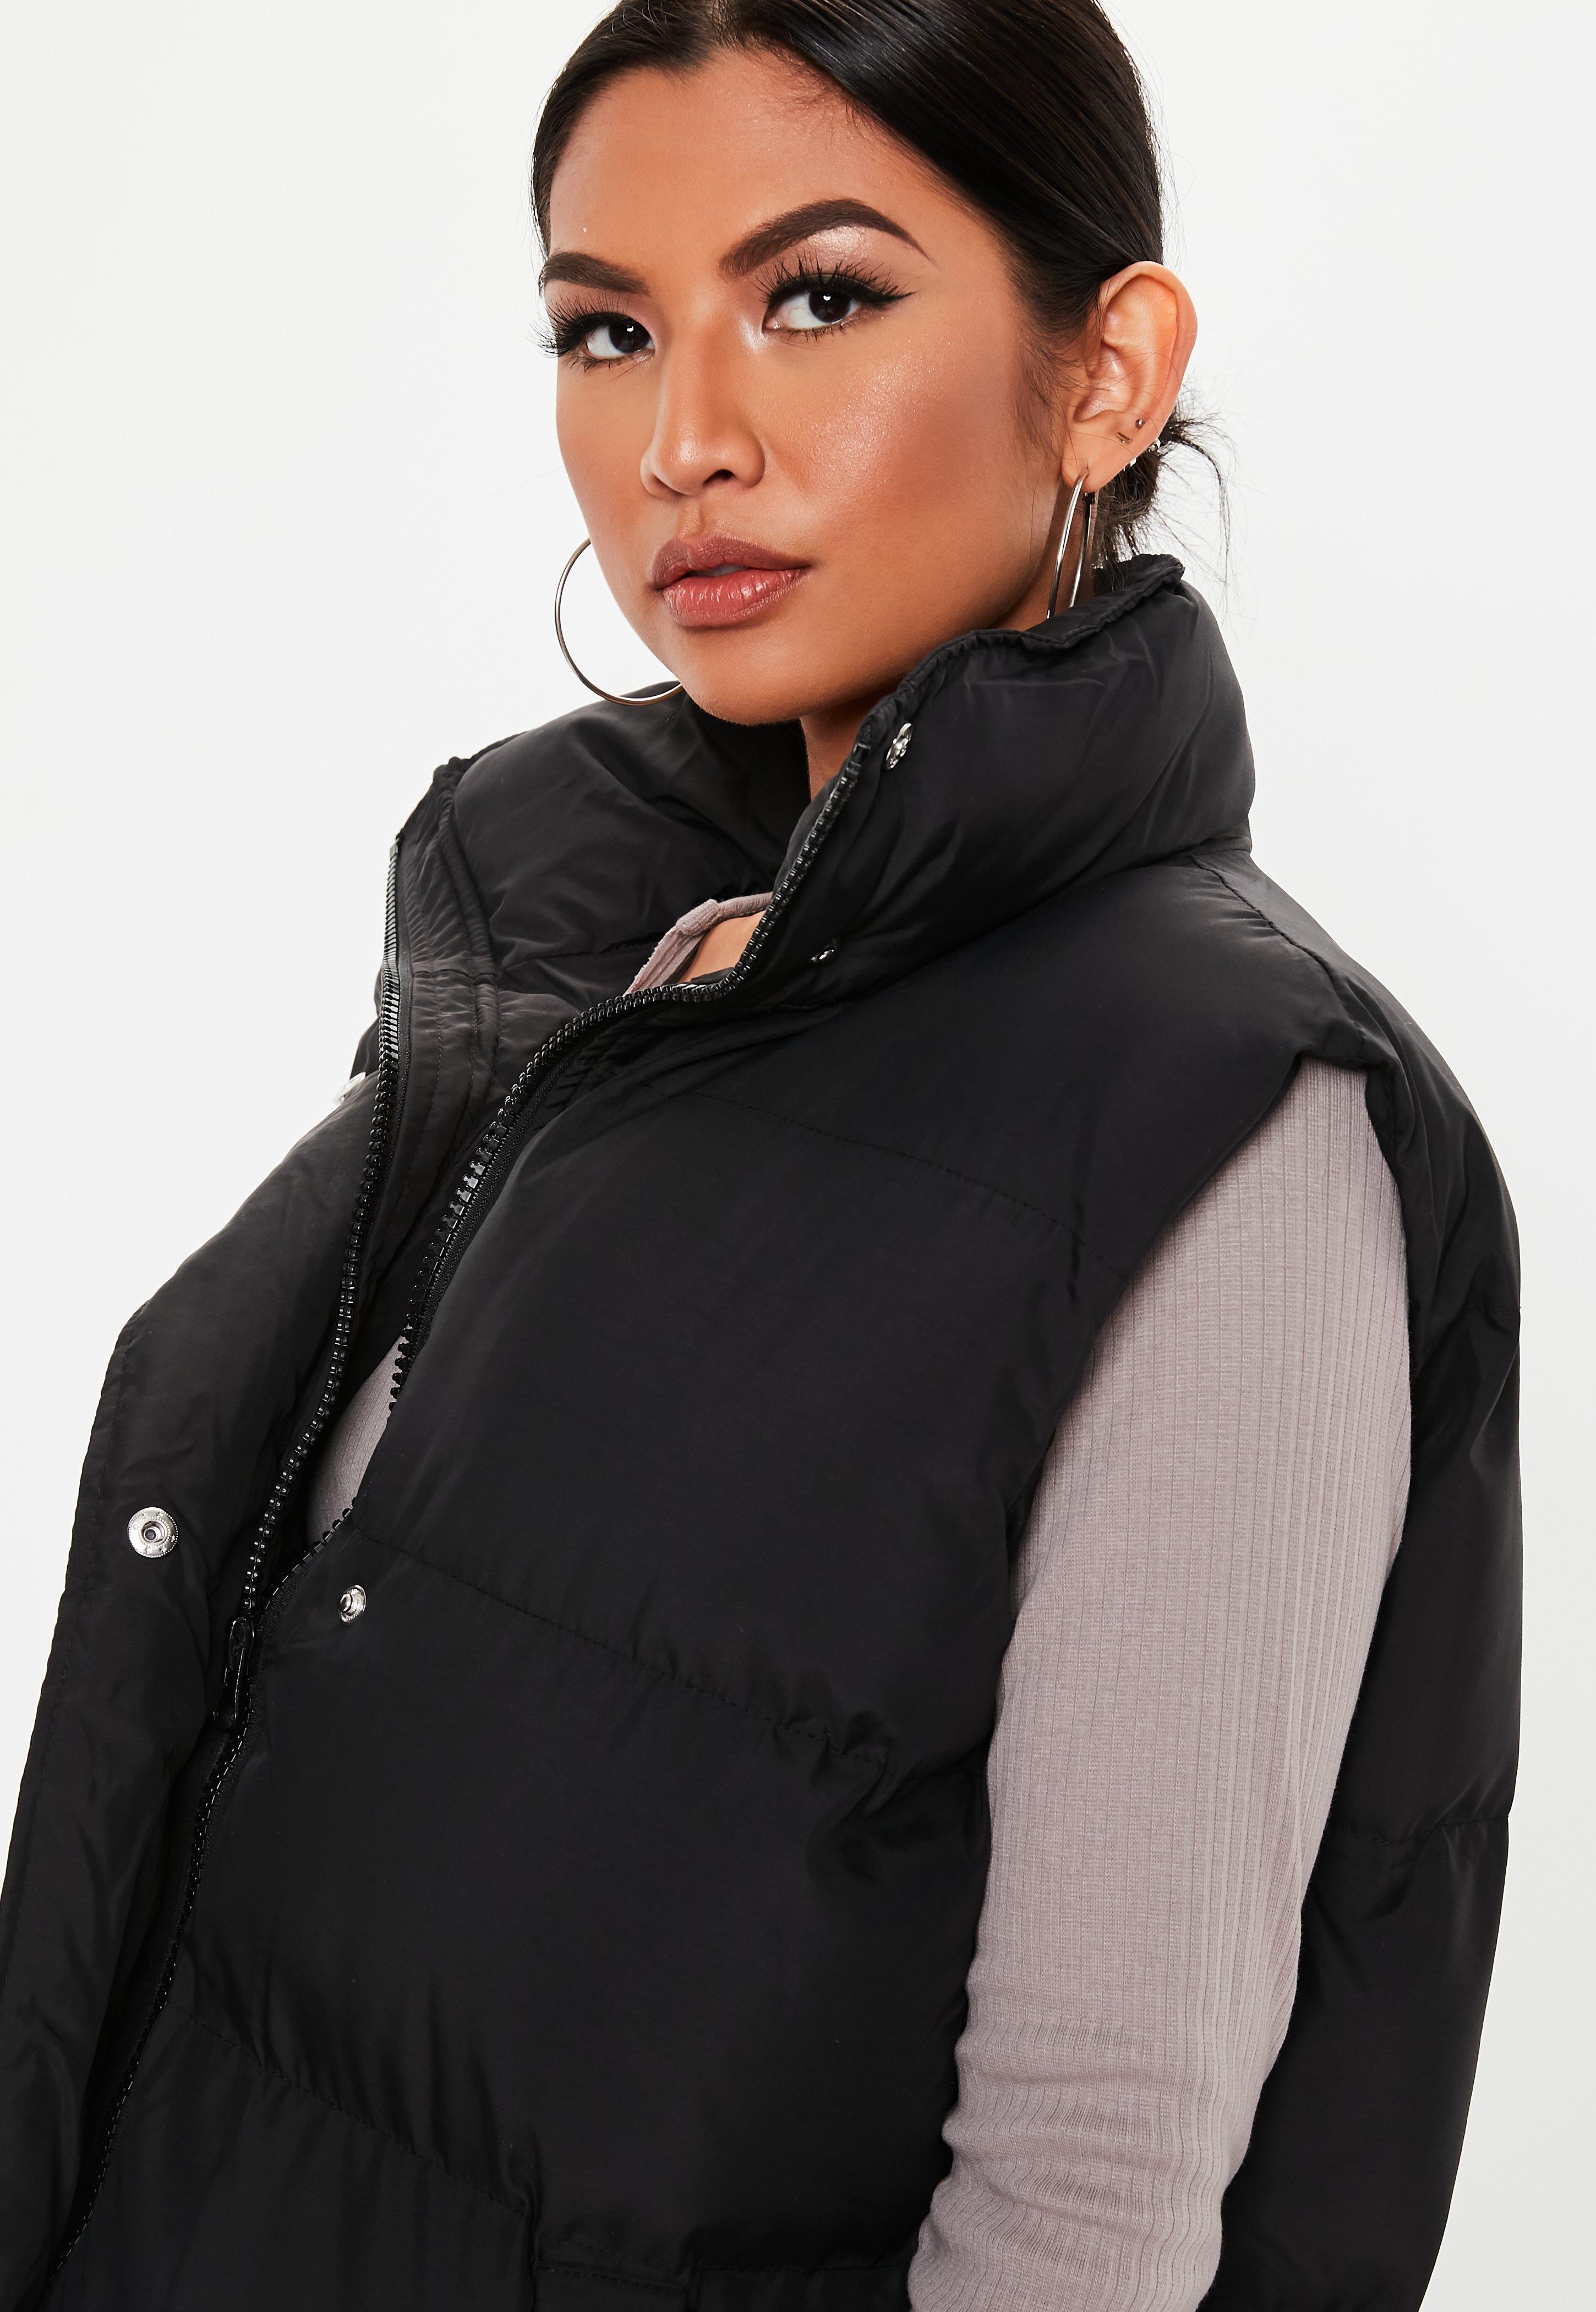 Long Puffer Gilet Cheapest Prices, Save 55% | jlcatj.gob.mx